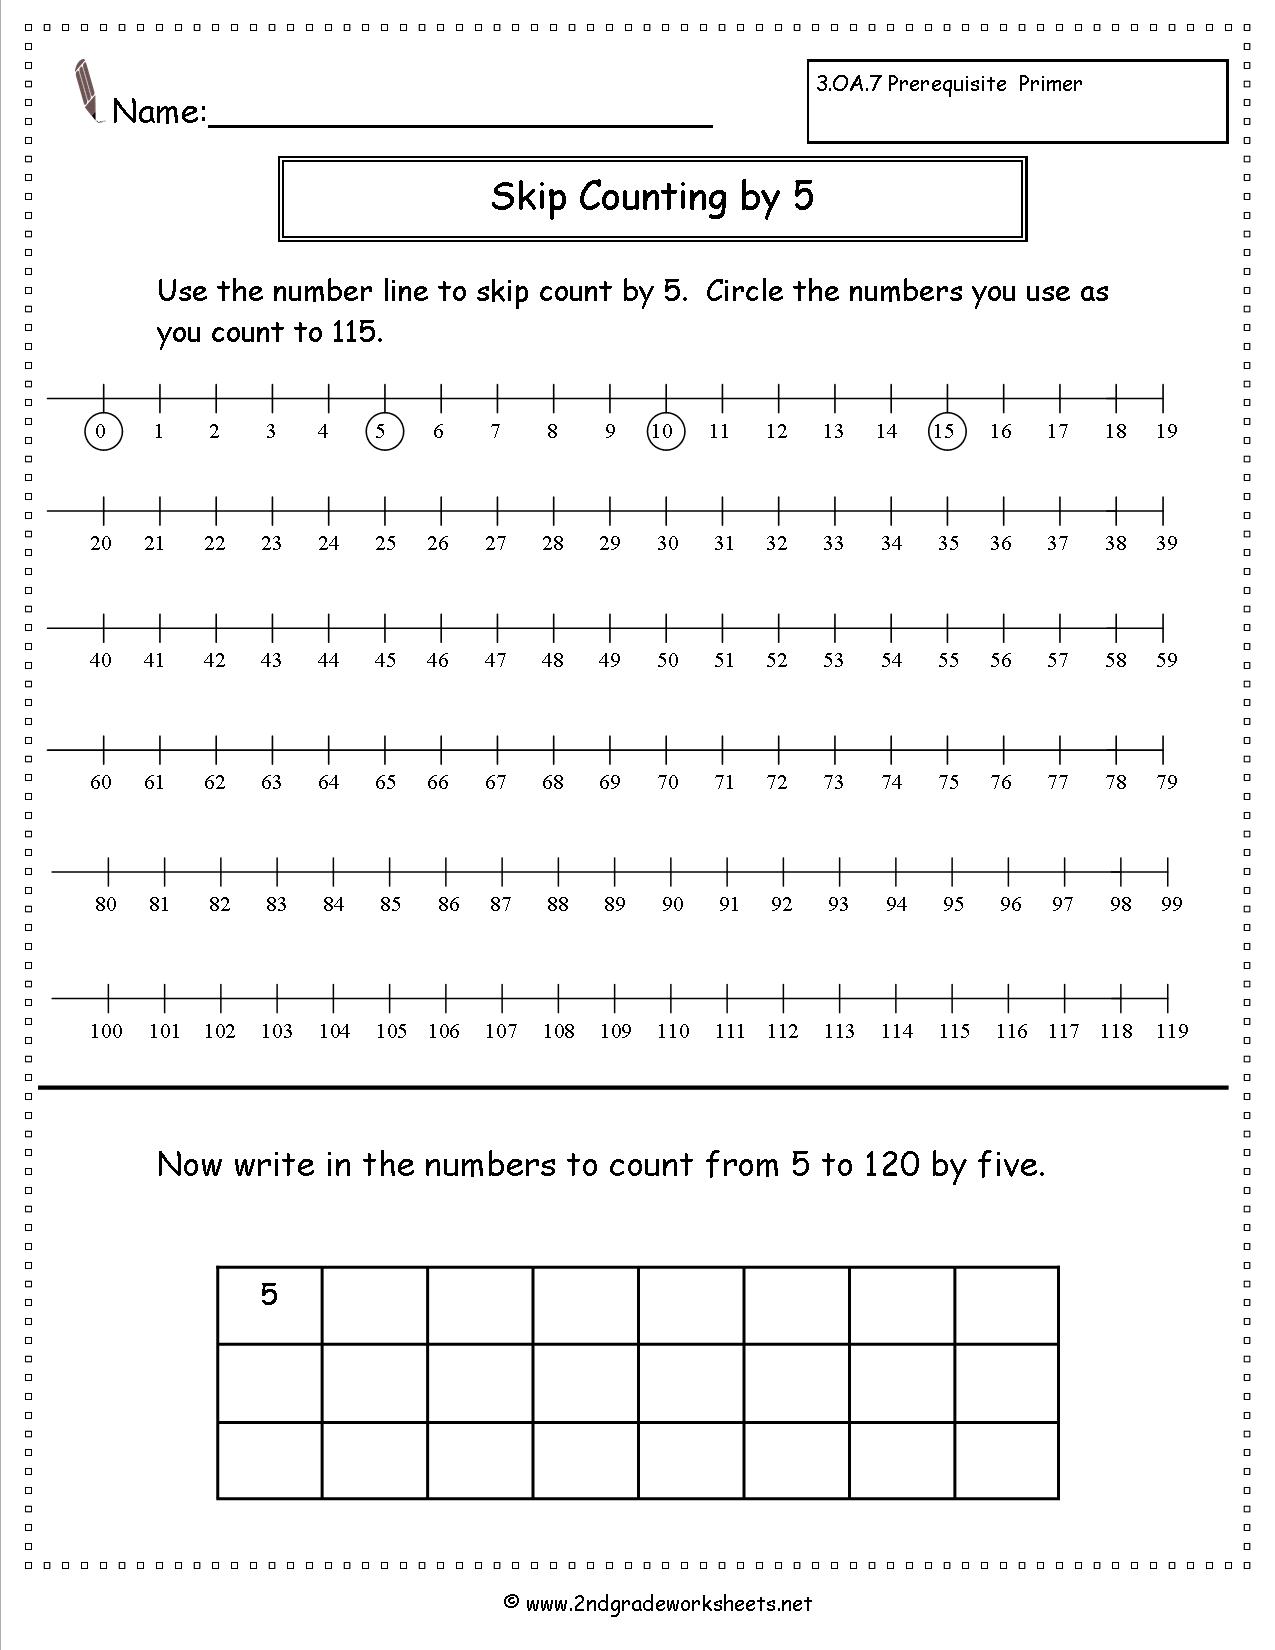 Skip Counting by 2 5 10 Worksheets Image